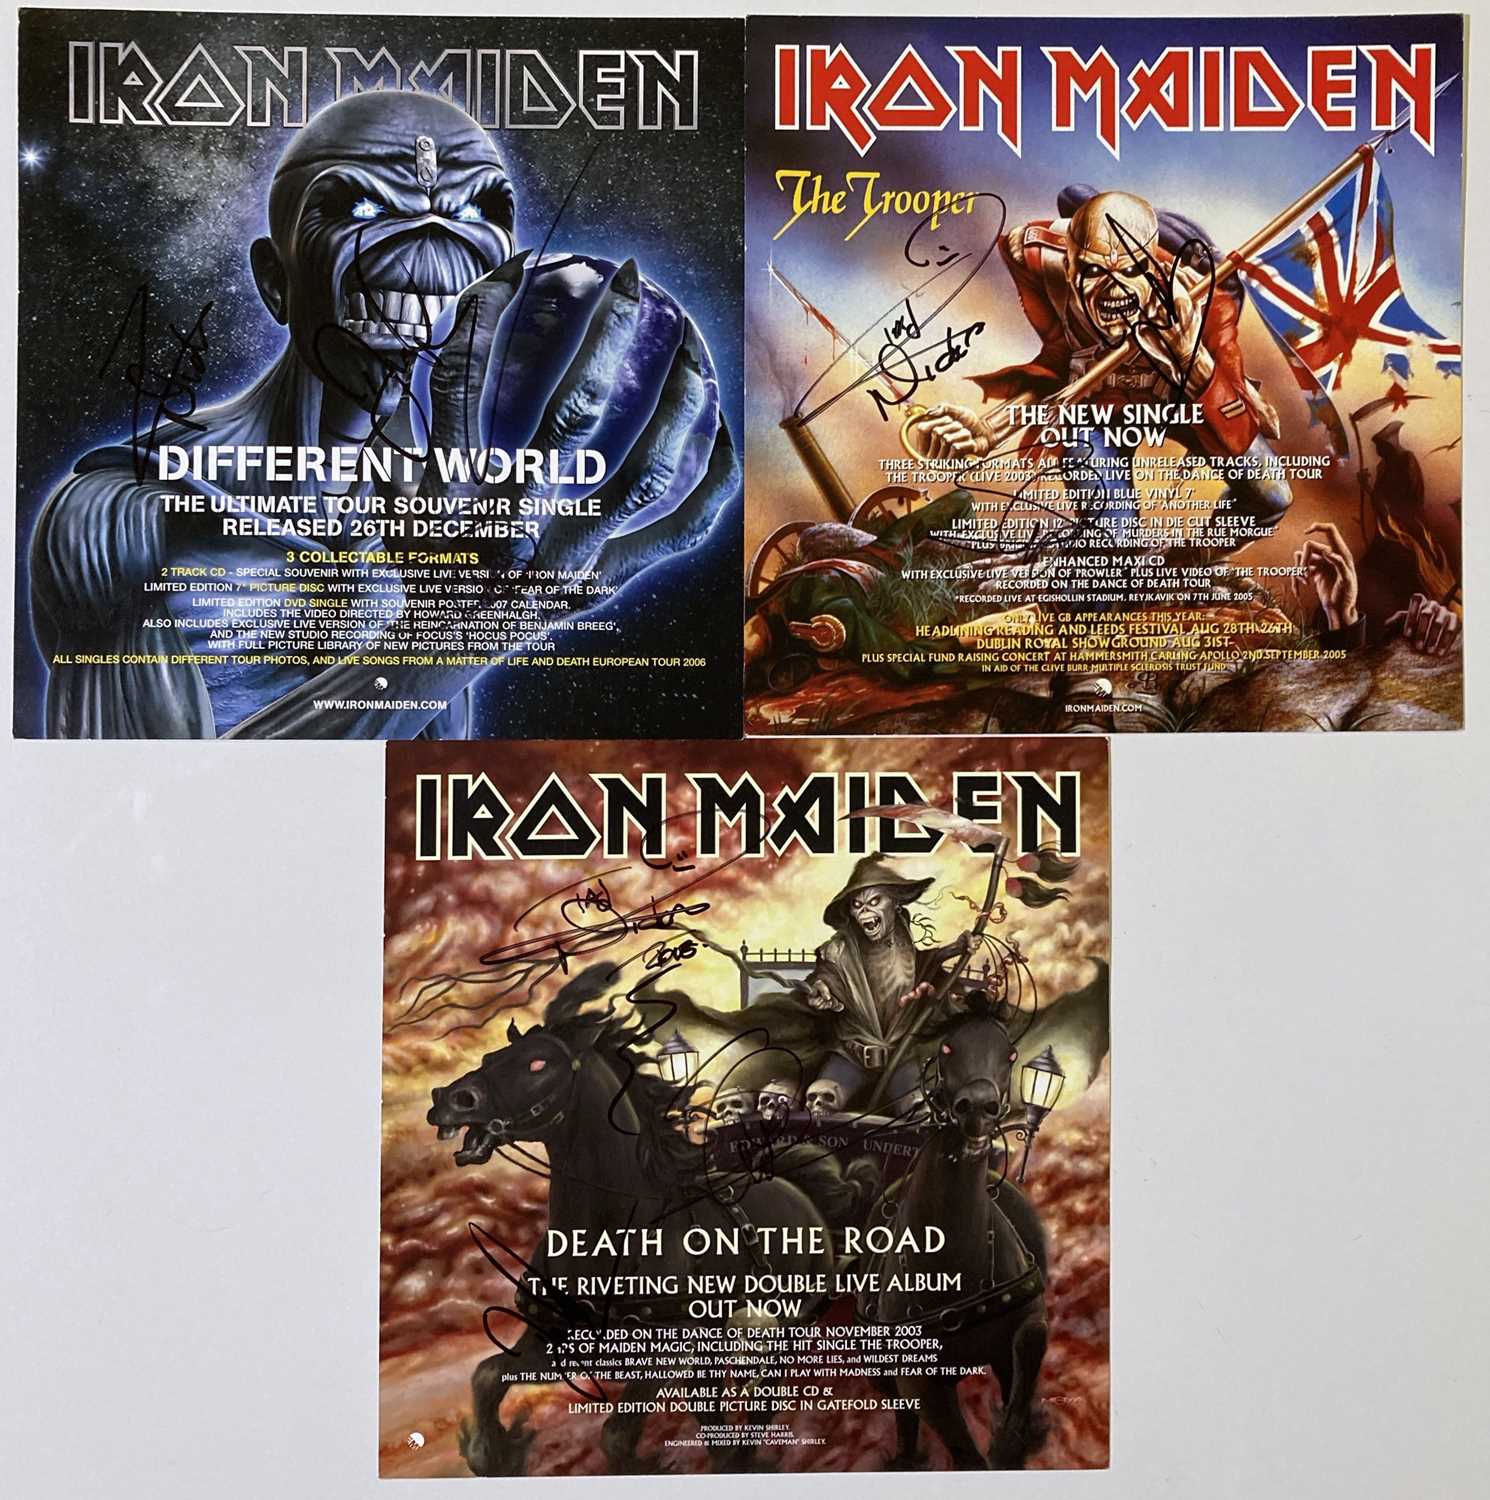 Lot 237 - IRON MAIDEN SIGNED ITEMS.